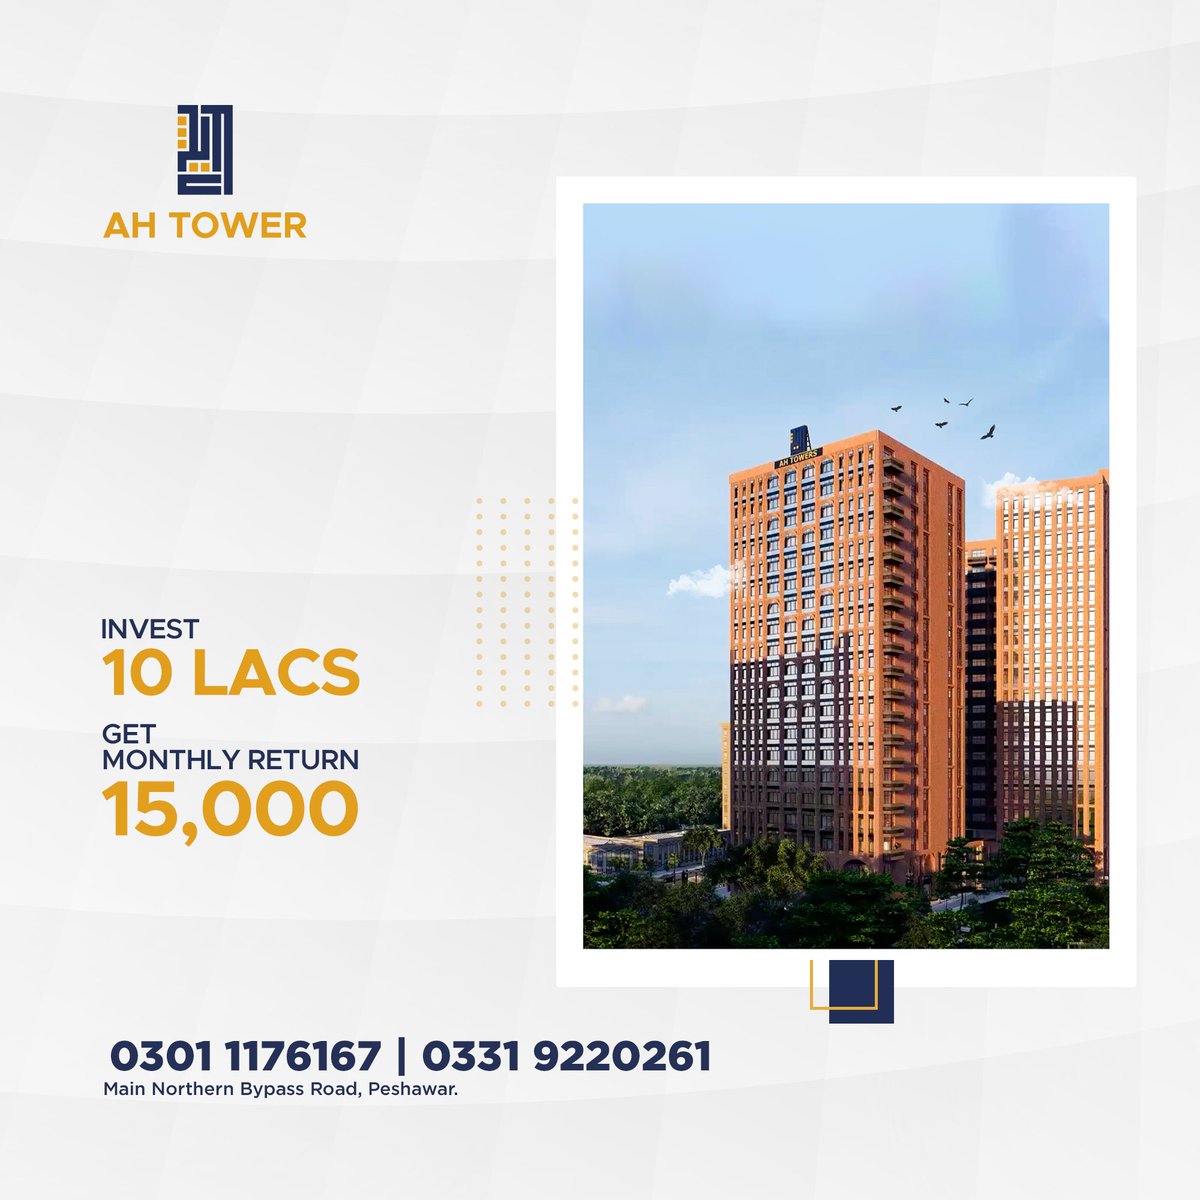 AH Towers is Peshawar's finest high rise residential and commercial destination offering world-class amenities. Invest 10 LACS and avail a monthly profit of PKR 15,000. Call us today!
📞 0301-1176167 |0331-9220261
✔️ TMA Approved
#AHTower #LuxuryForEveryone #residential #Peshawar